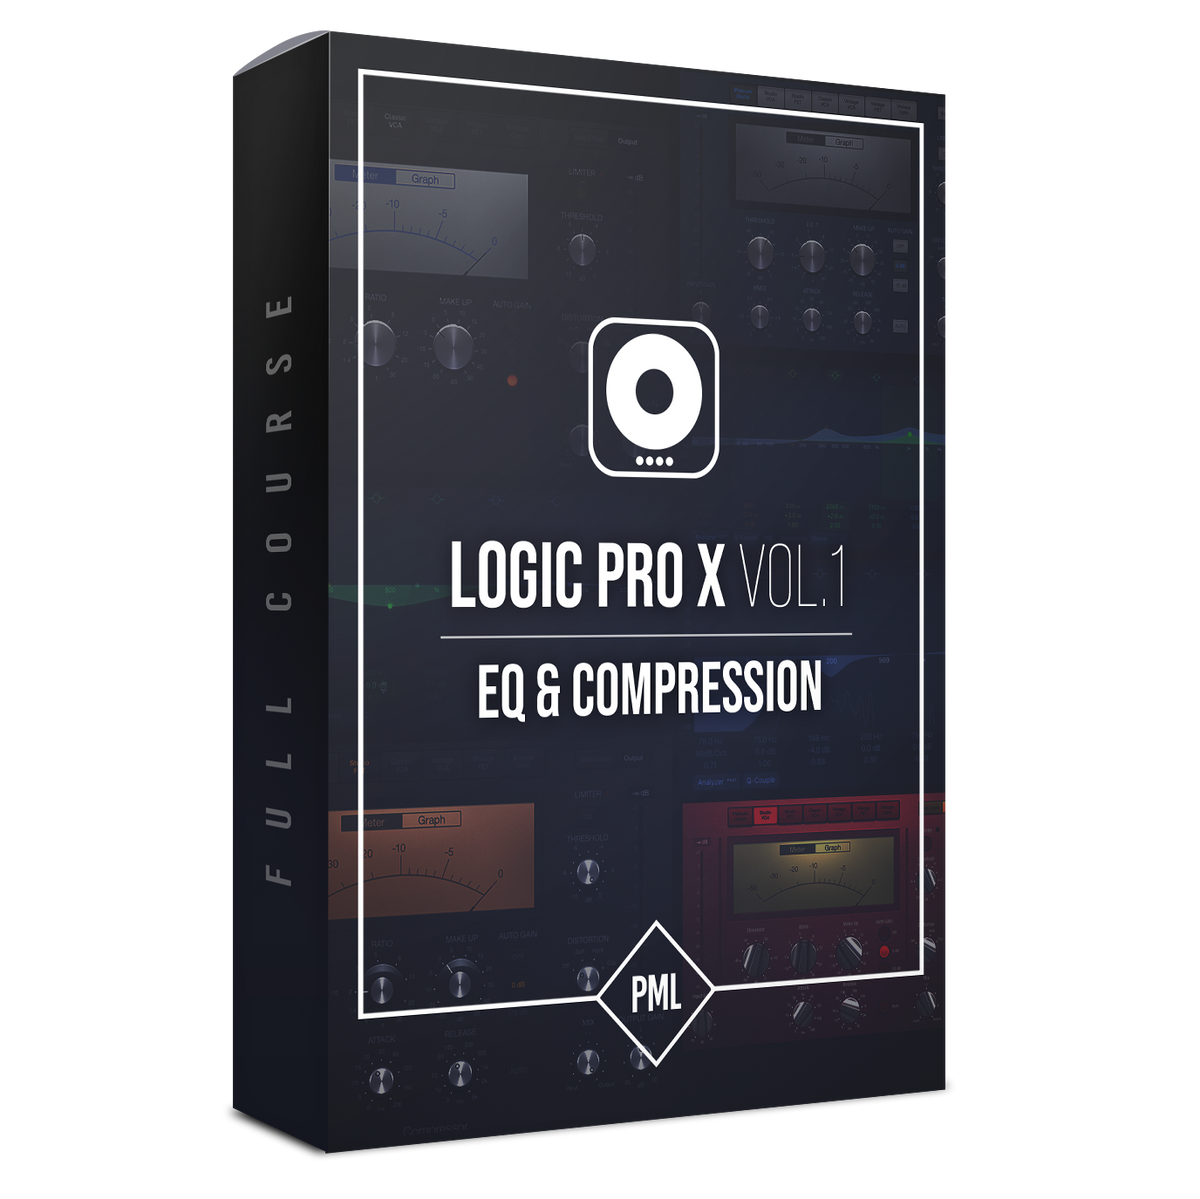 Getting the Most Out of Logic Pro X - Vol. 1 Product Box